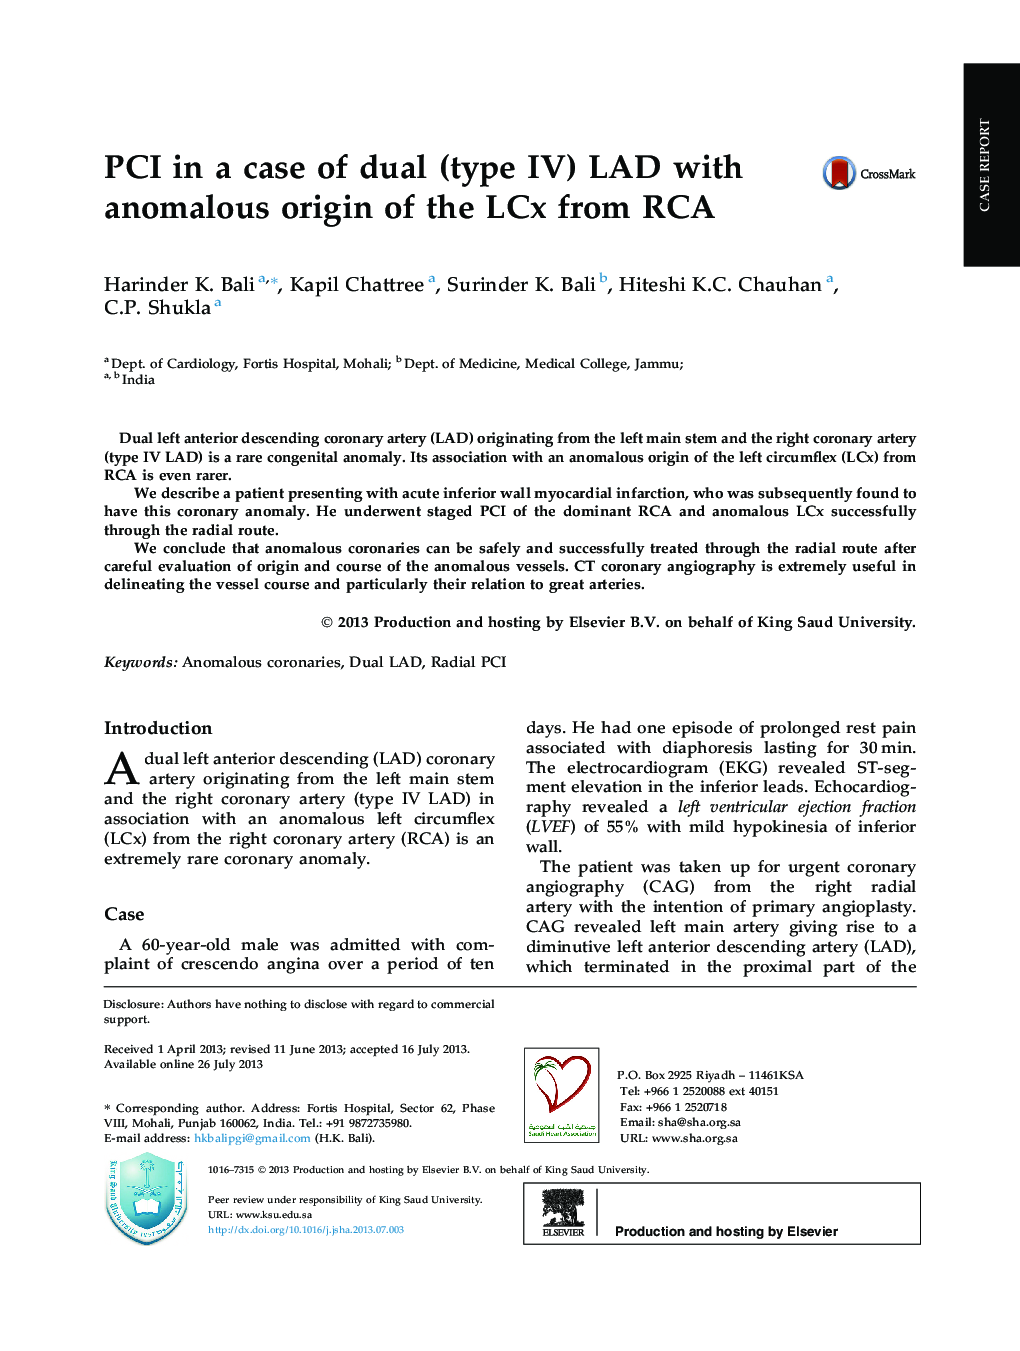 PCI in a case of dual (type IV) LAD with anomalous origin of the LCx from RCA 